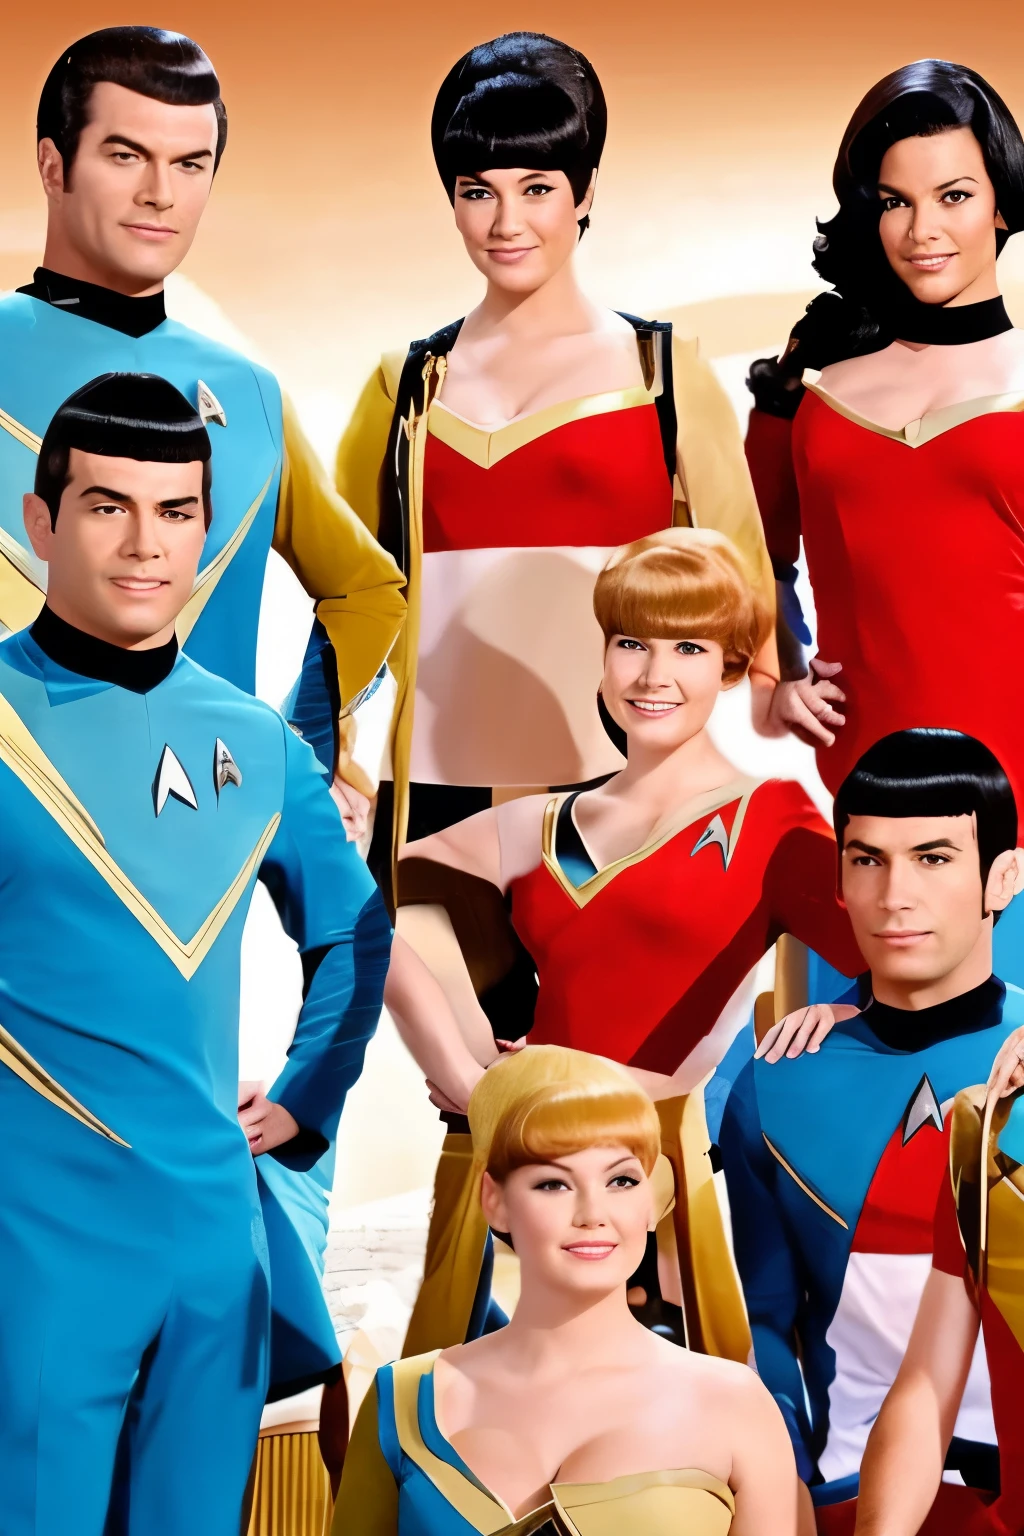 60s Star Trek Porn - A close up of a group of people in costumes posing for a picture - SeaArt AI